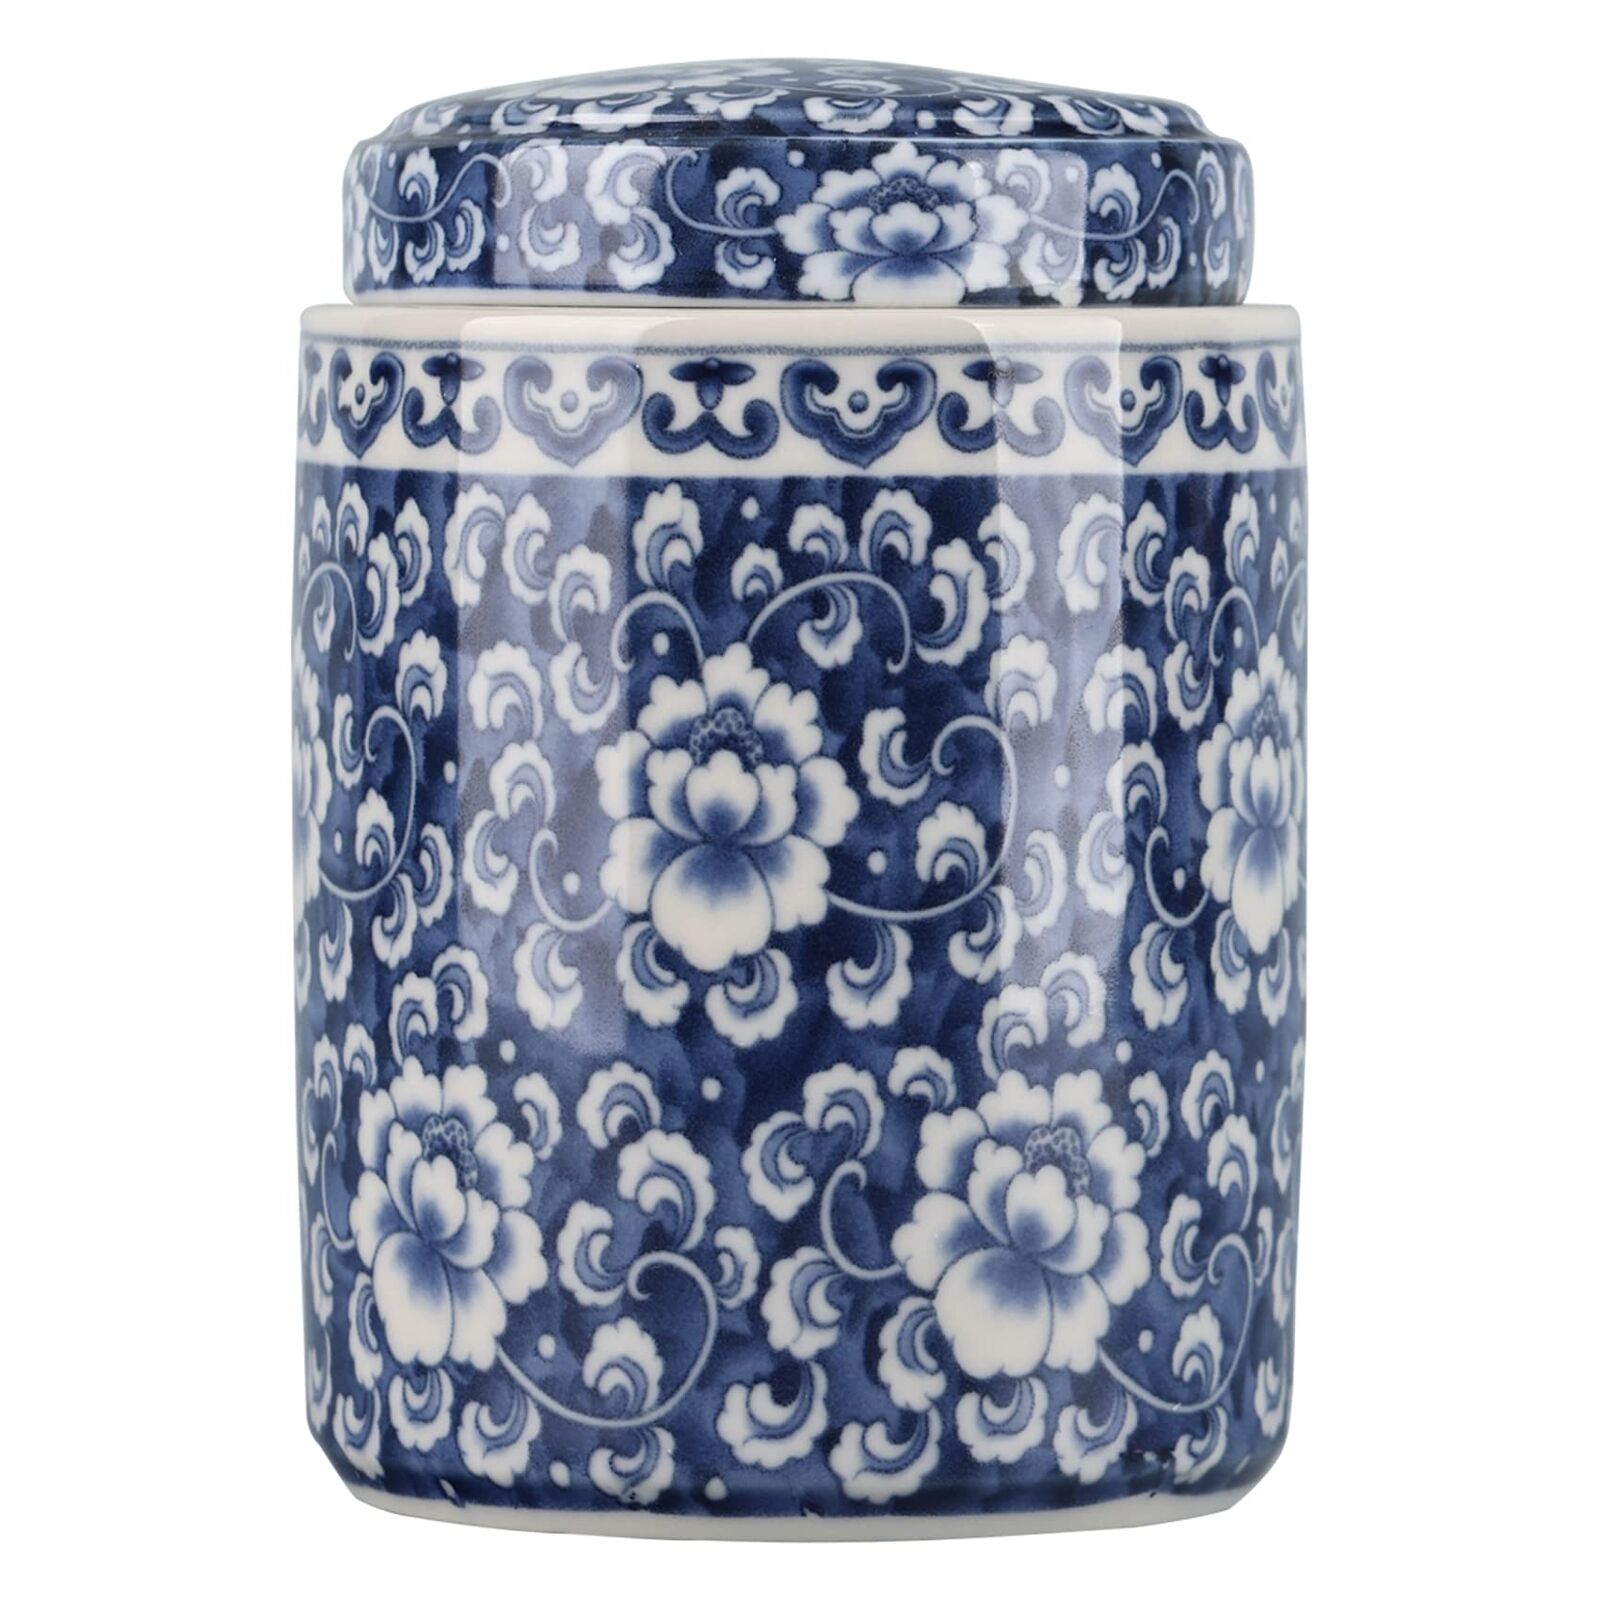 Chinese Traditional Antique Style Blue and White Porcelain Ginger Jar Ceramic...